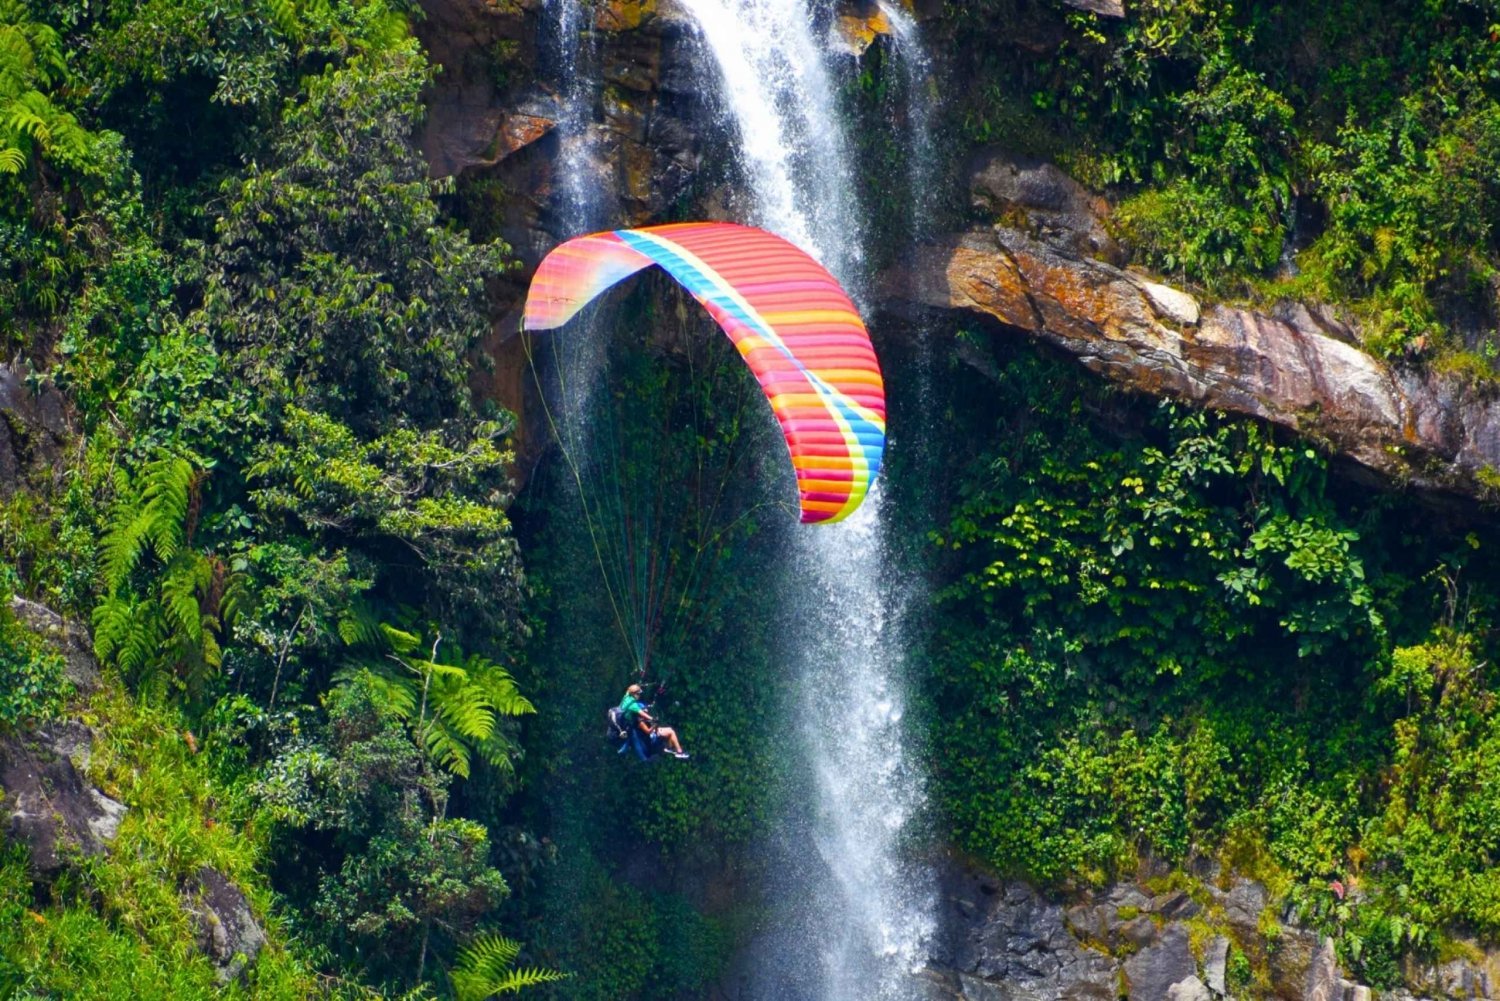 From Medellin: Private Paragliding Tour Over Waterfalls